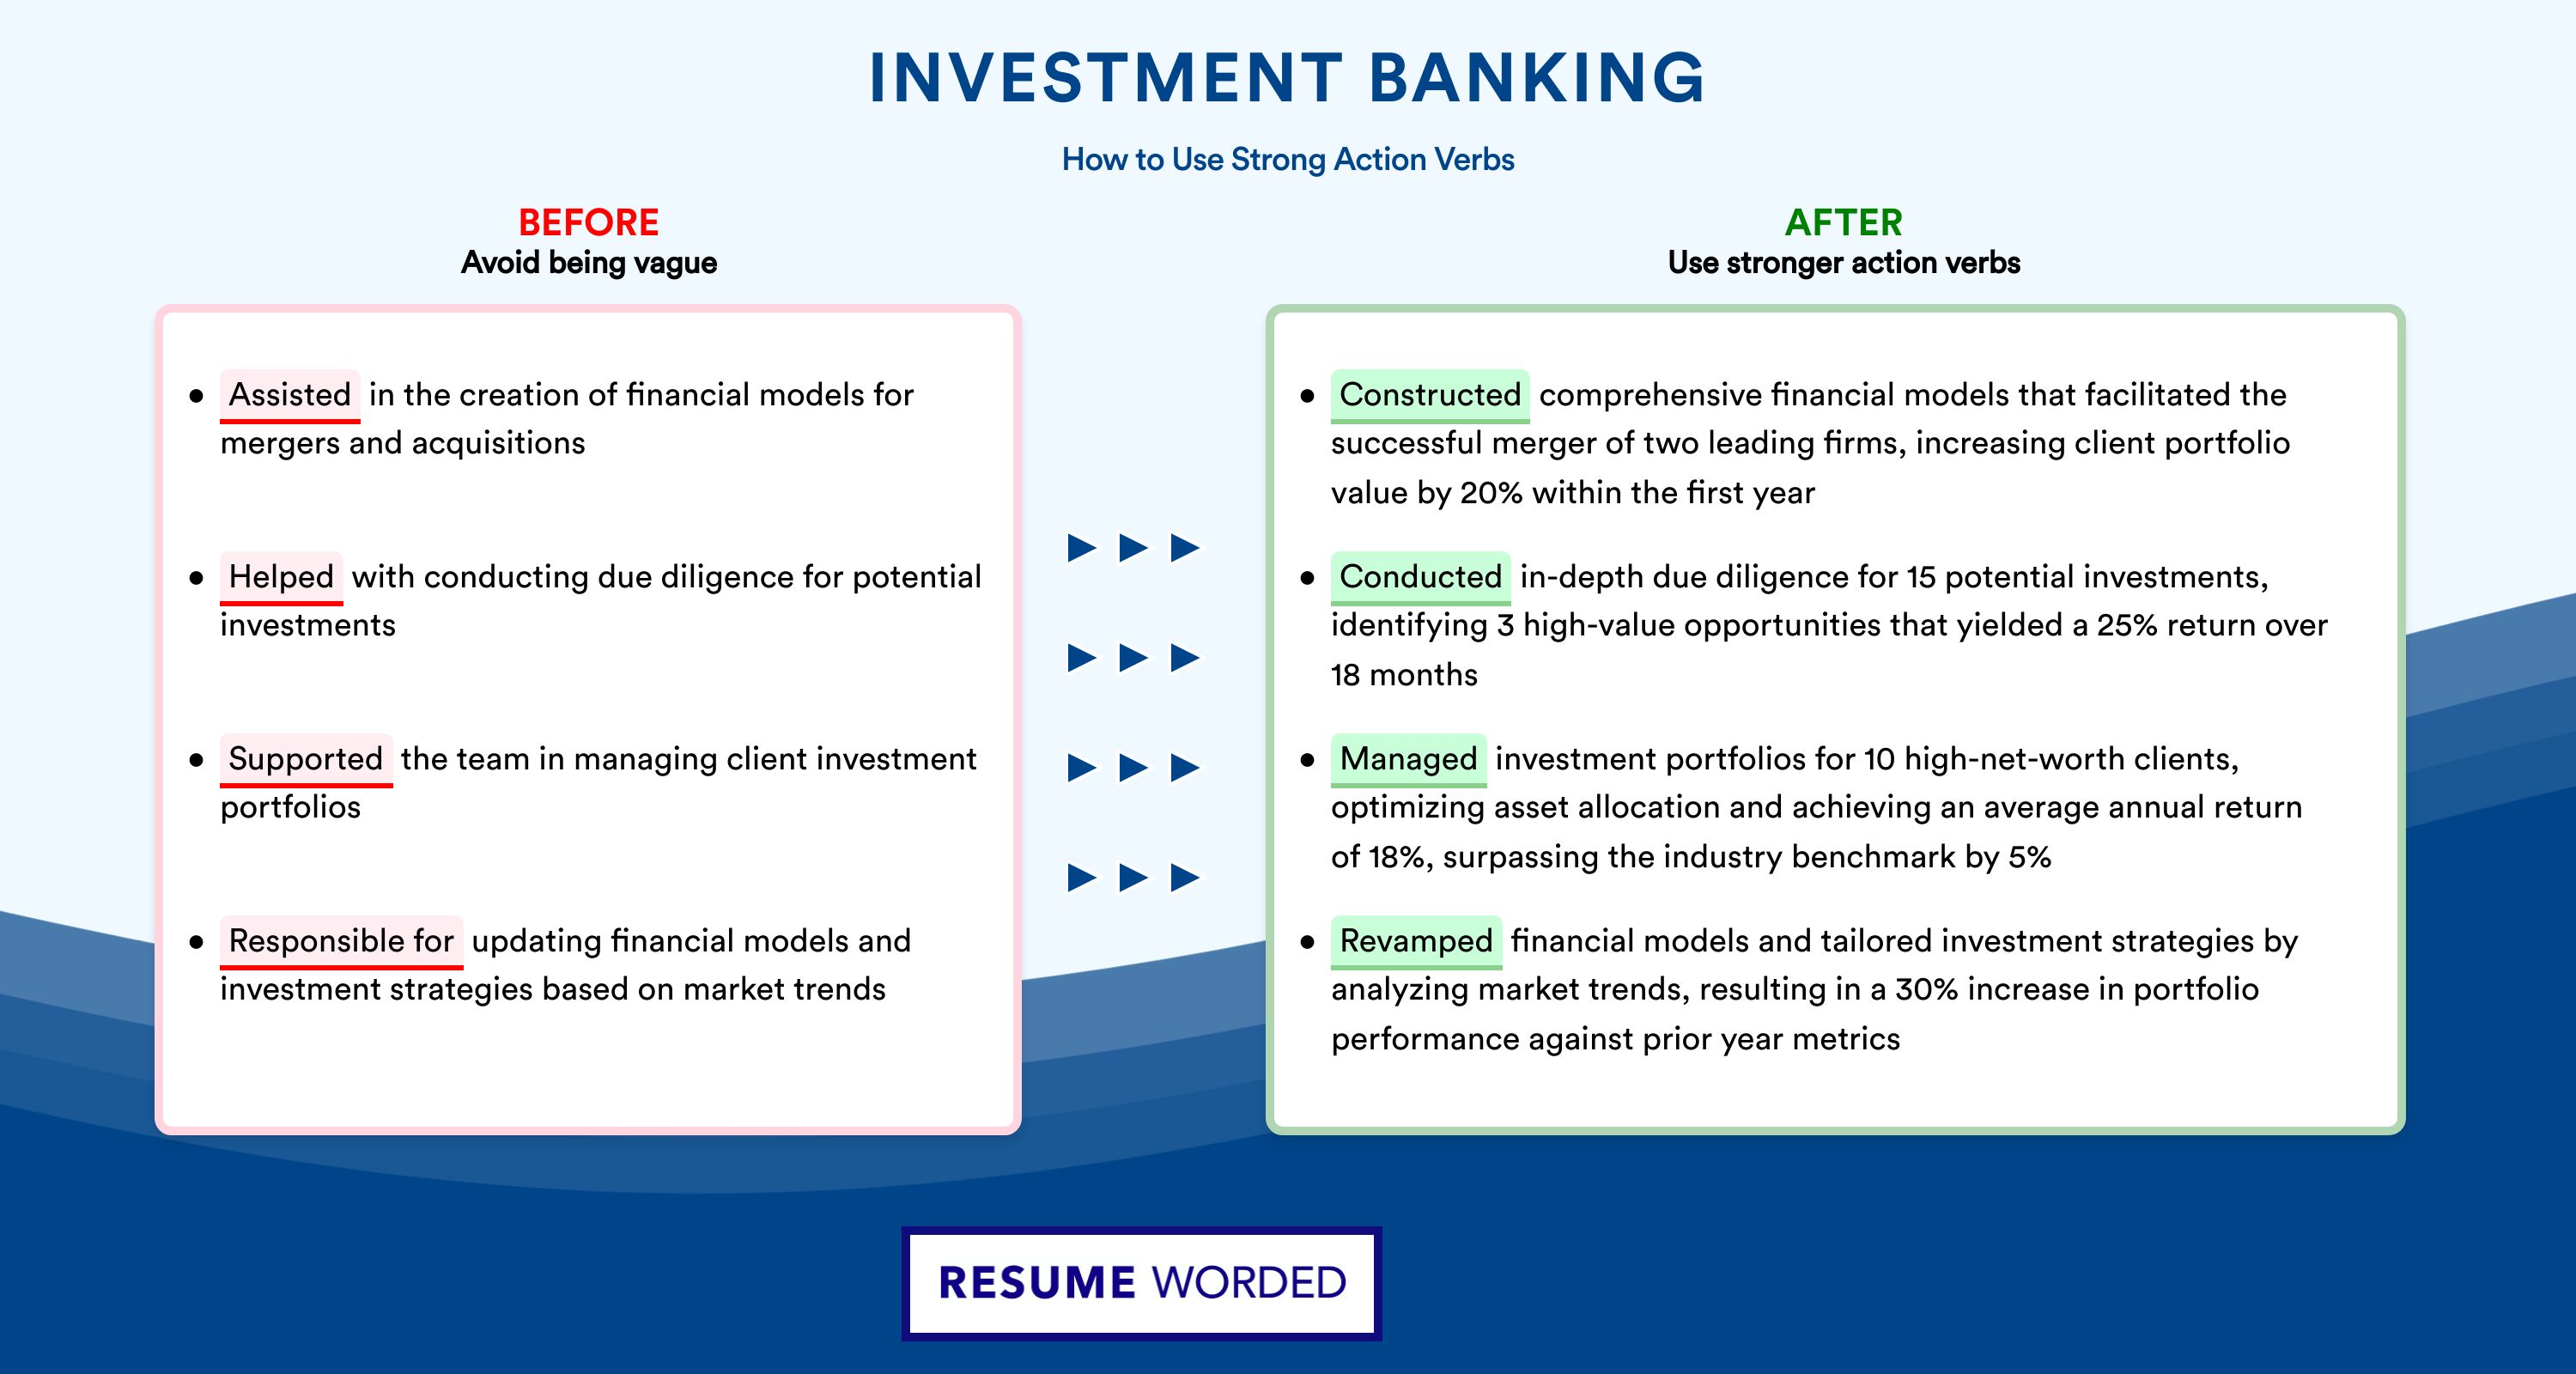 Action Verbs for Investment Banking